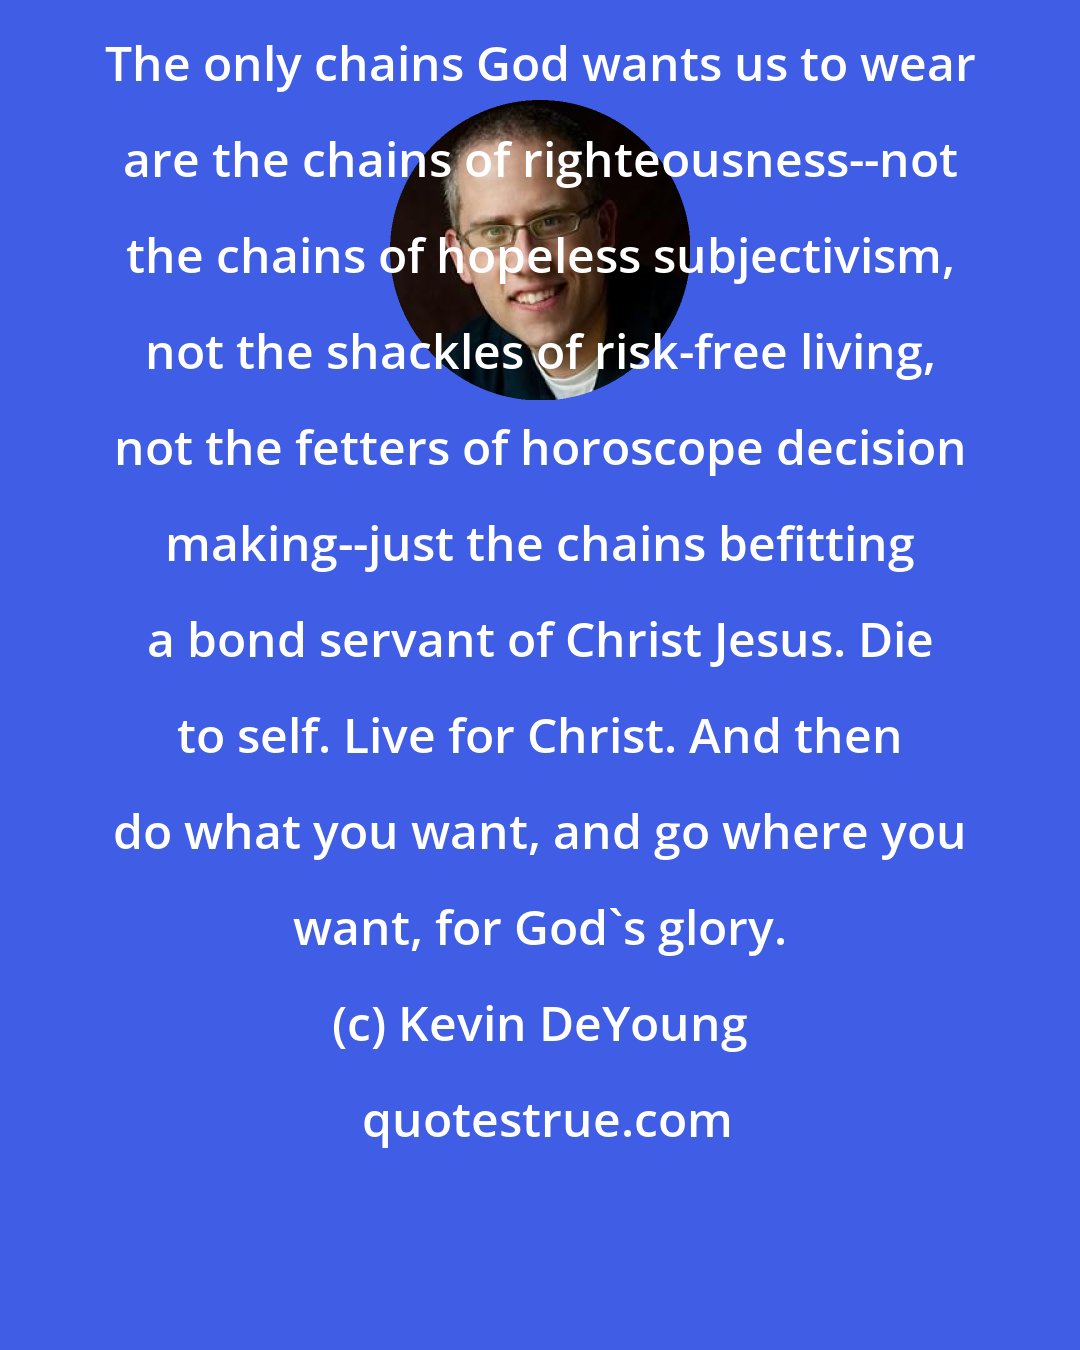 Kevin DeYoung: The only chains God wants us to wear are the chains of righteousness--not the chains of hopeless subjectivism, not the shackles of risk-free living, not the fetters of horoscope decision making--just the chains befitting a bond servant of Christ Jesus. Die to self. Live for Christ. And then do what you want, and go where you want, for God's glory.